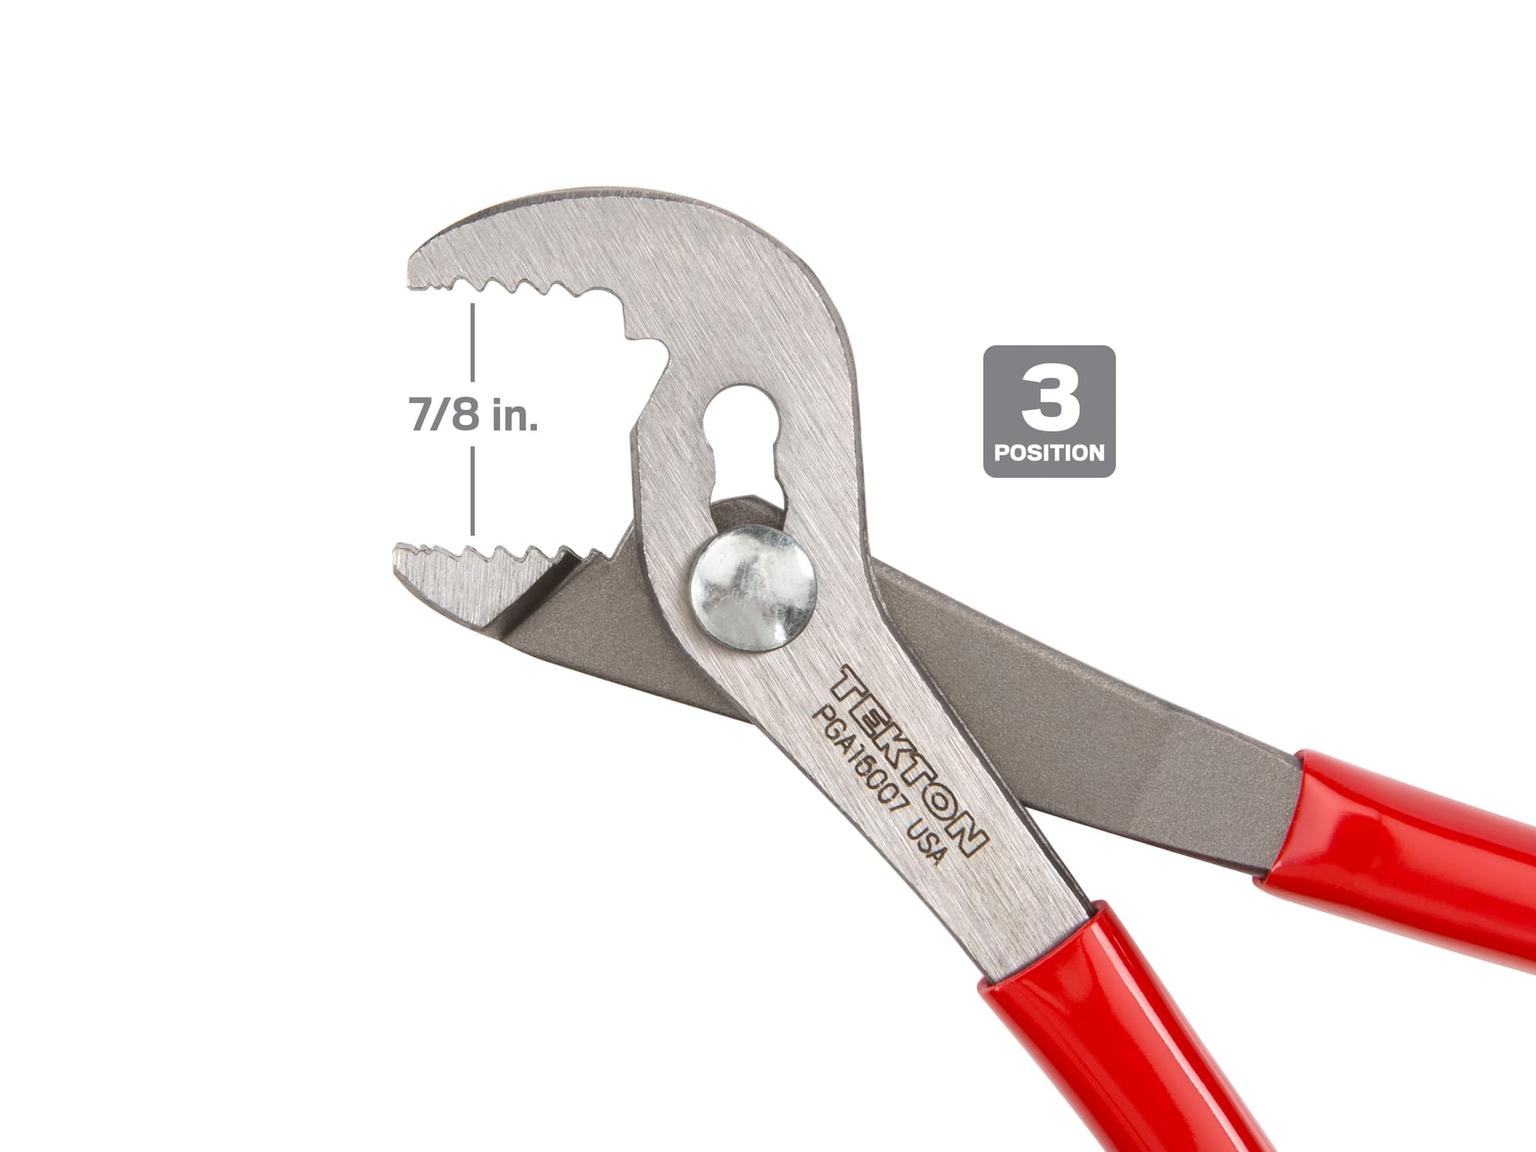 TEKTON PGA16007-T 7 Inch Angle Nose Slip Joint Pliers (7/8 in. Jaw)